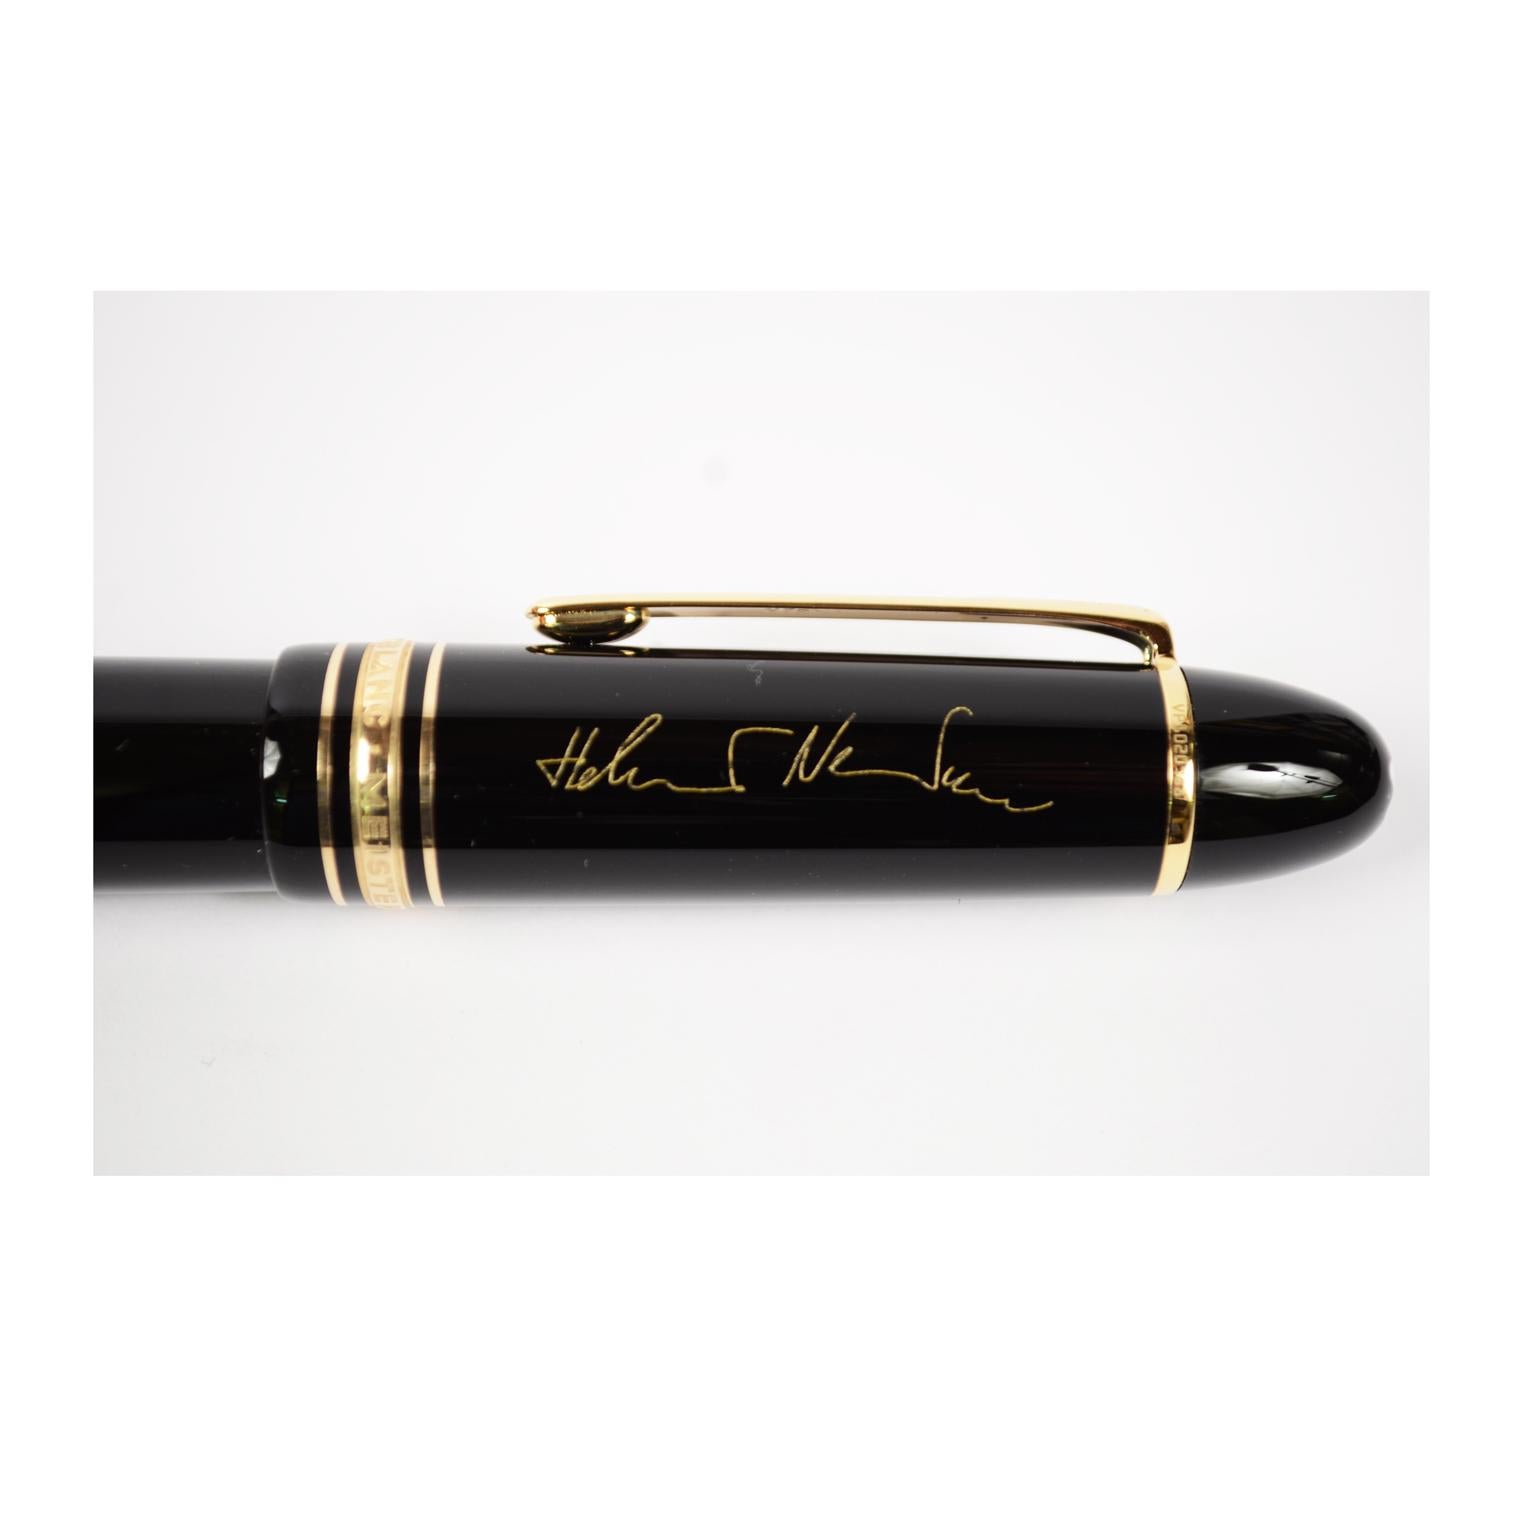 Mm Mont Blanc Meisterstuck 149 Signed by Helmut Newton 2